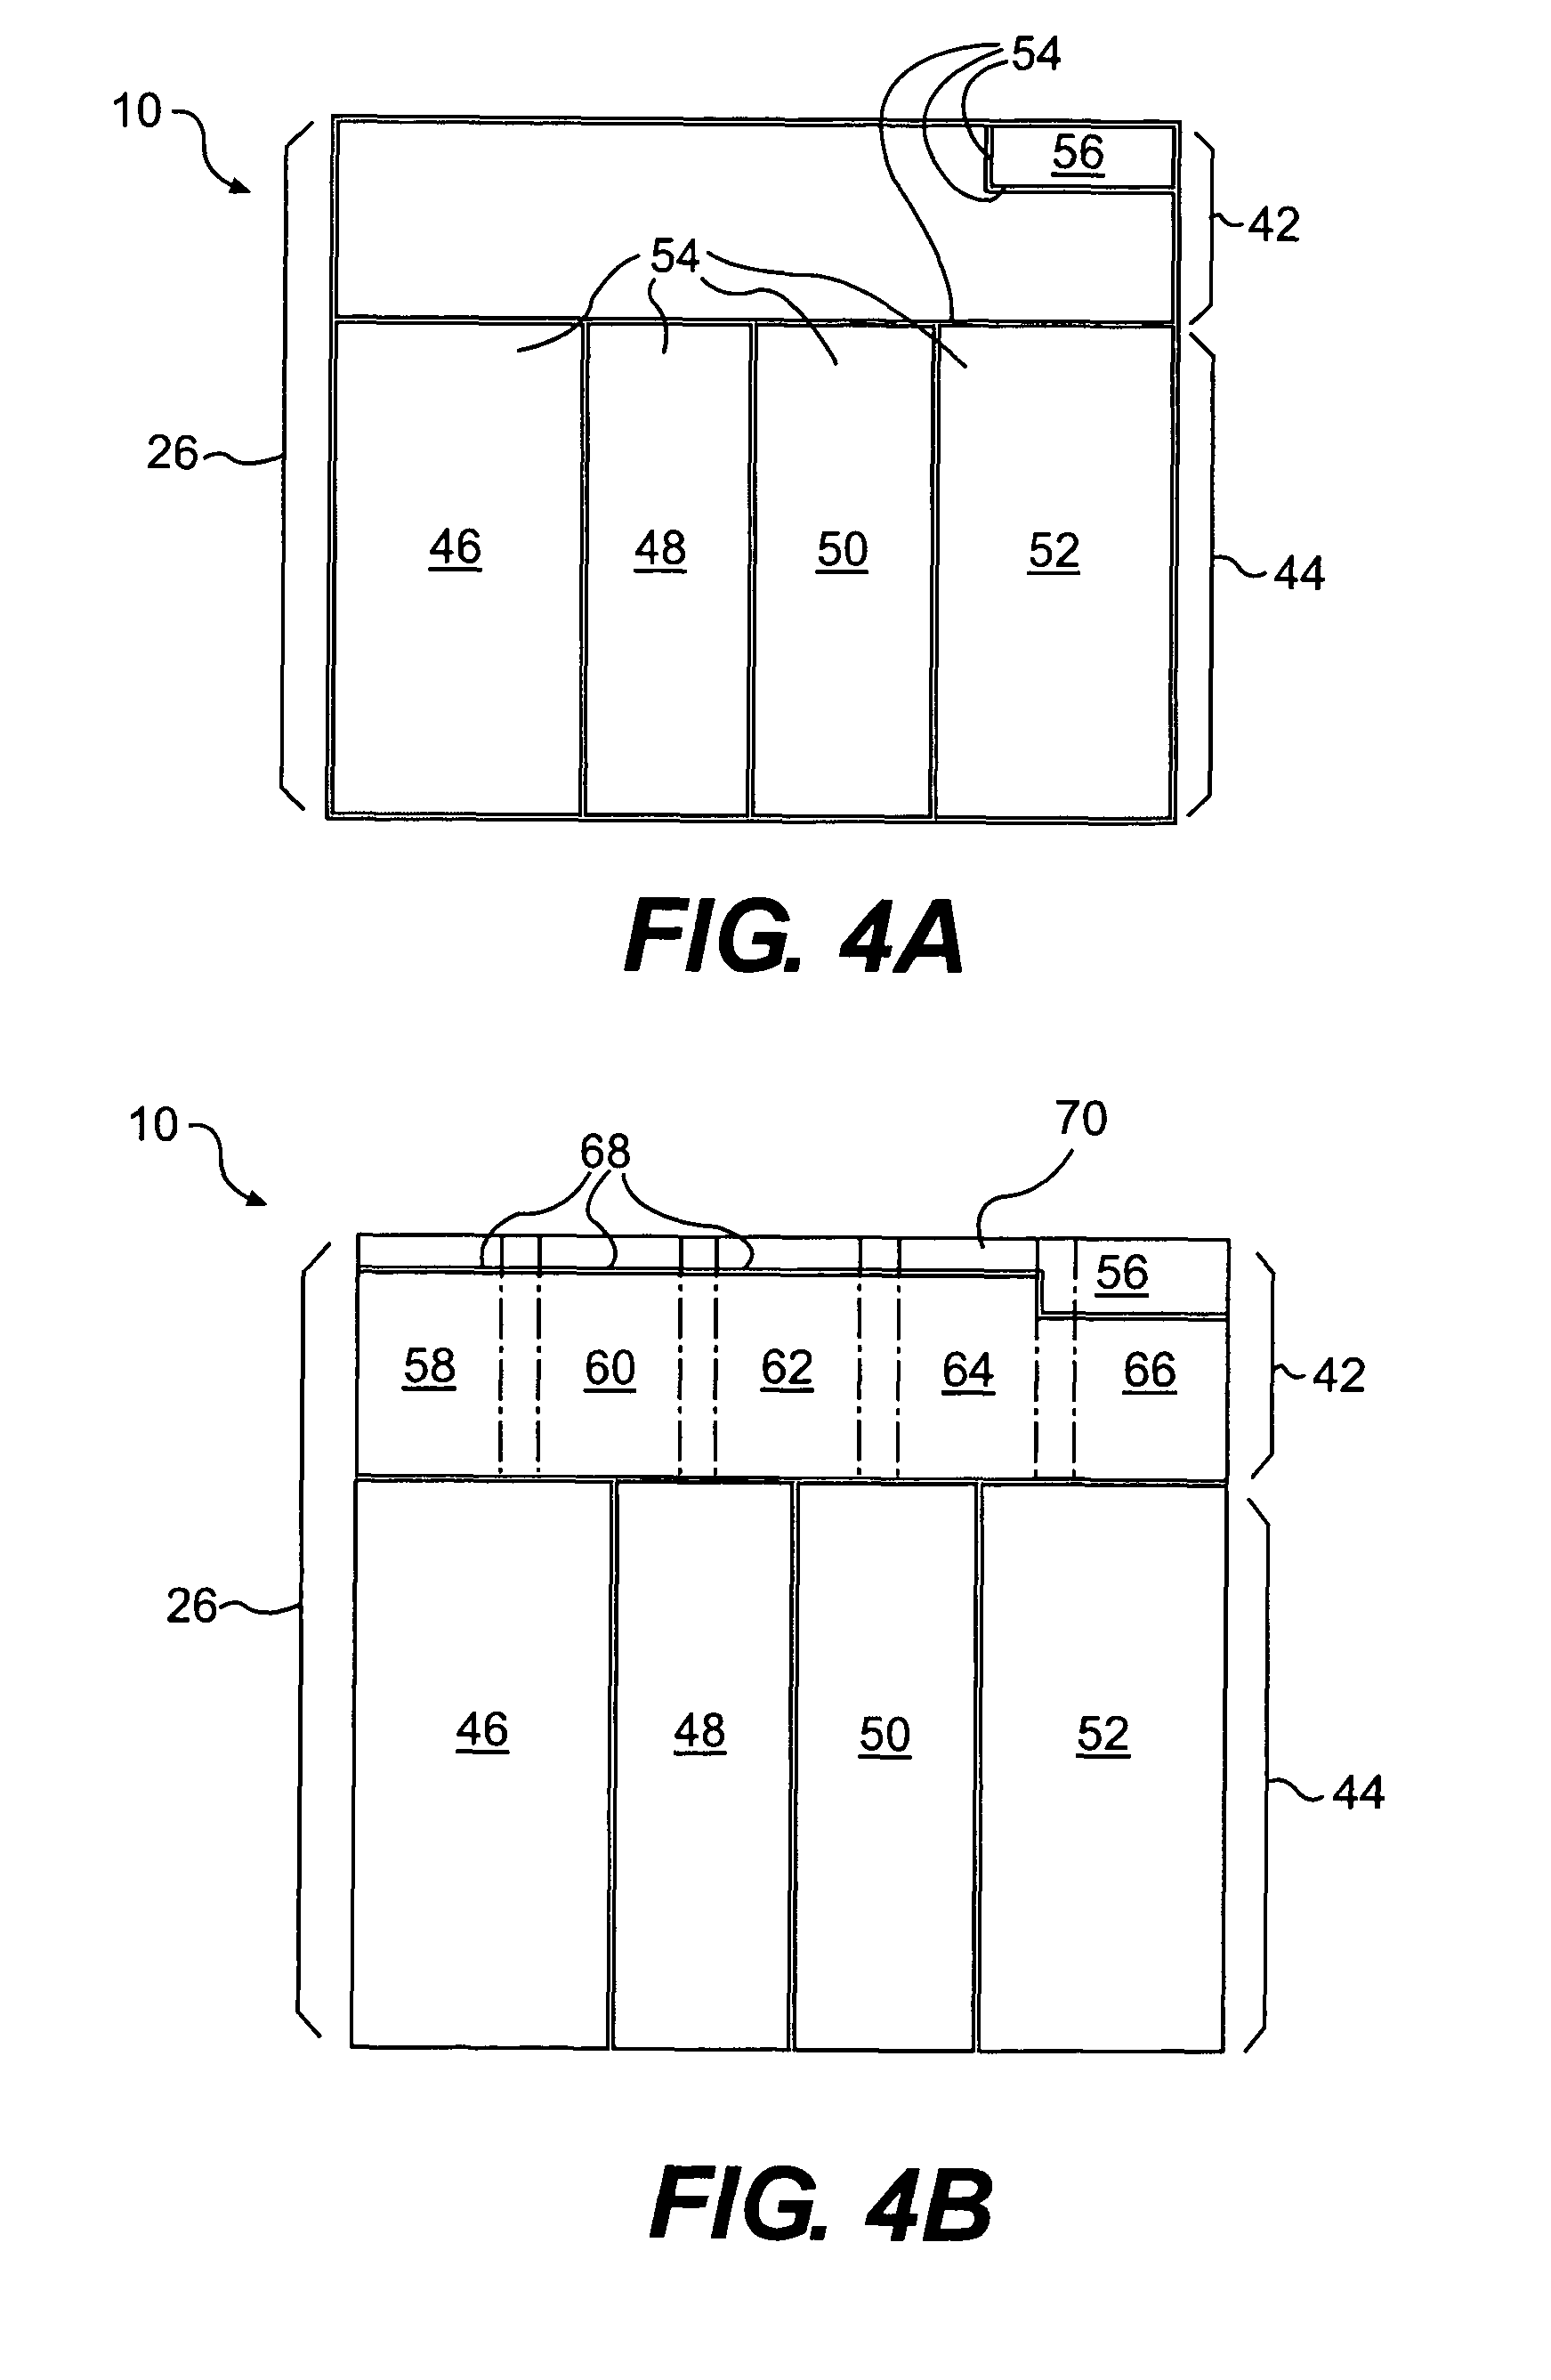 Method of making a diagnostic test strip having a coding system